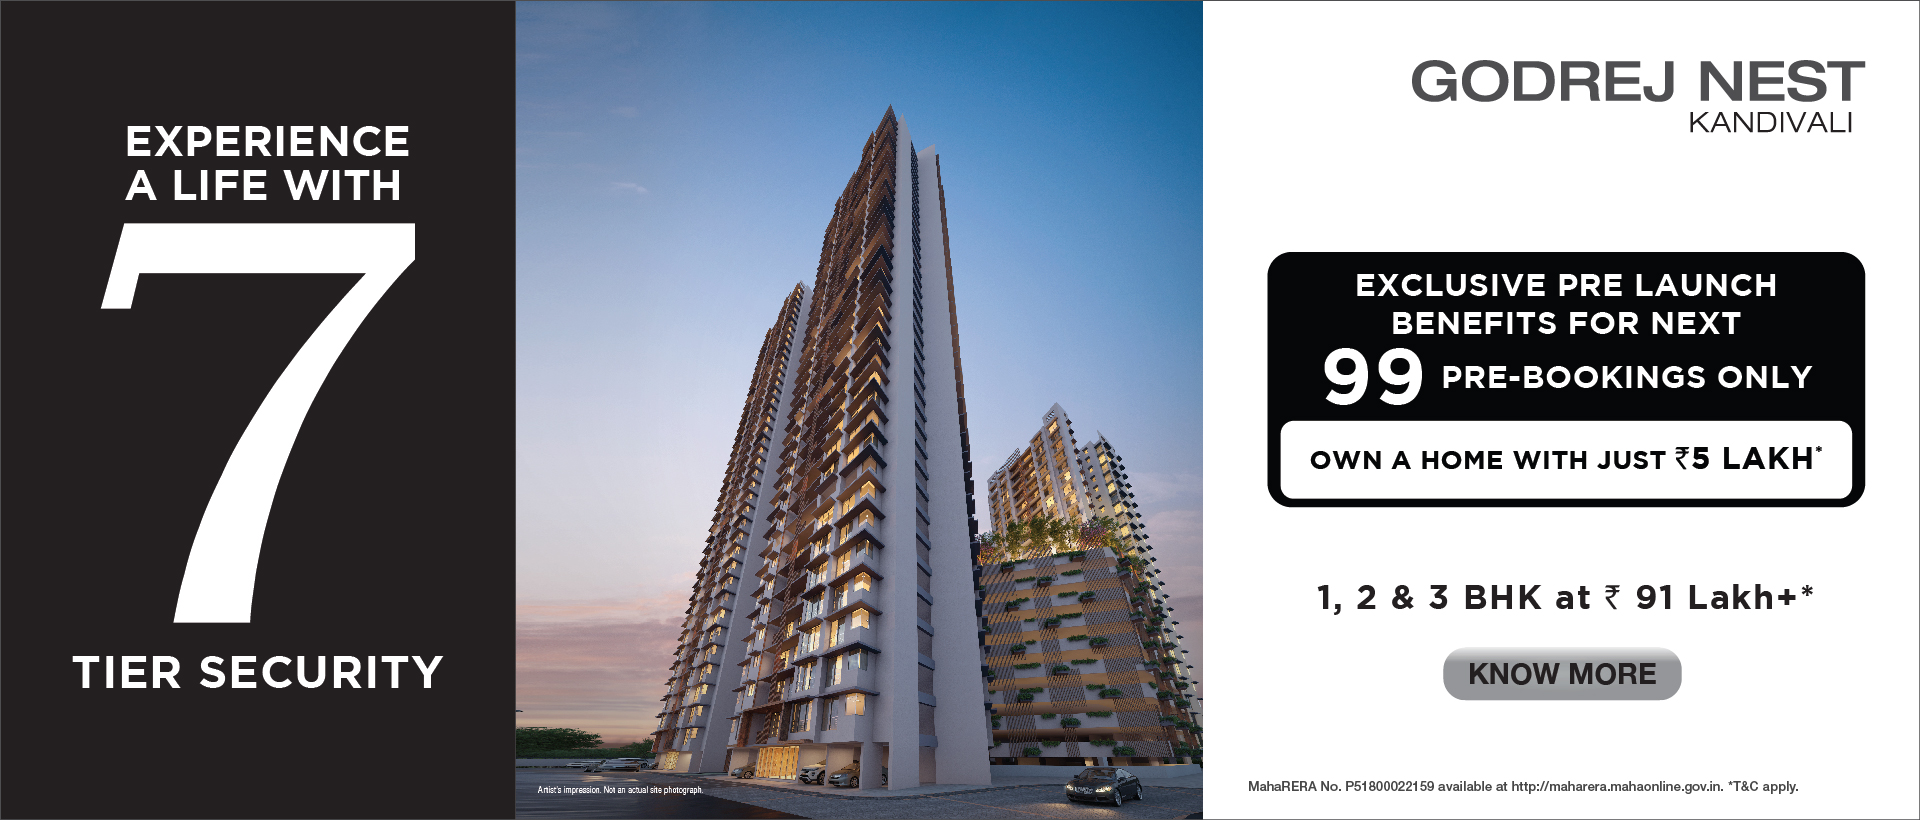 1, 2 and 3 bhk at Rs 91 lakh onwards at Godrej Nest in Noida Update